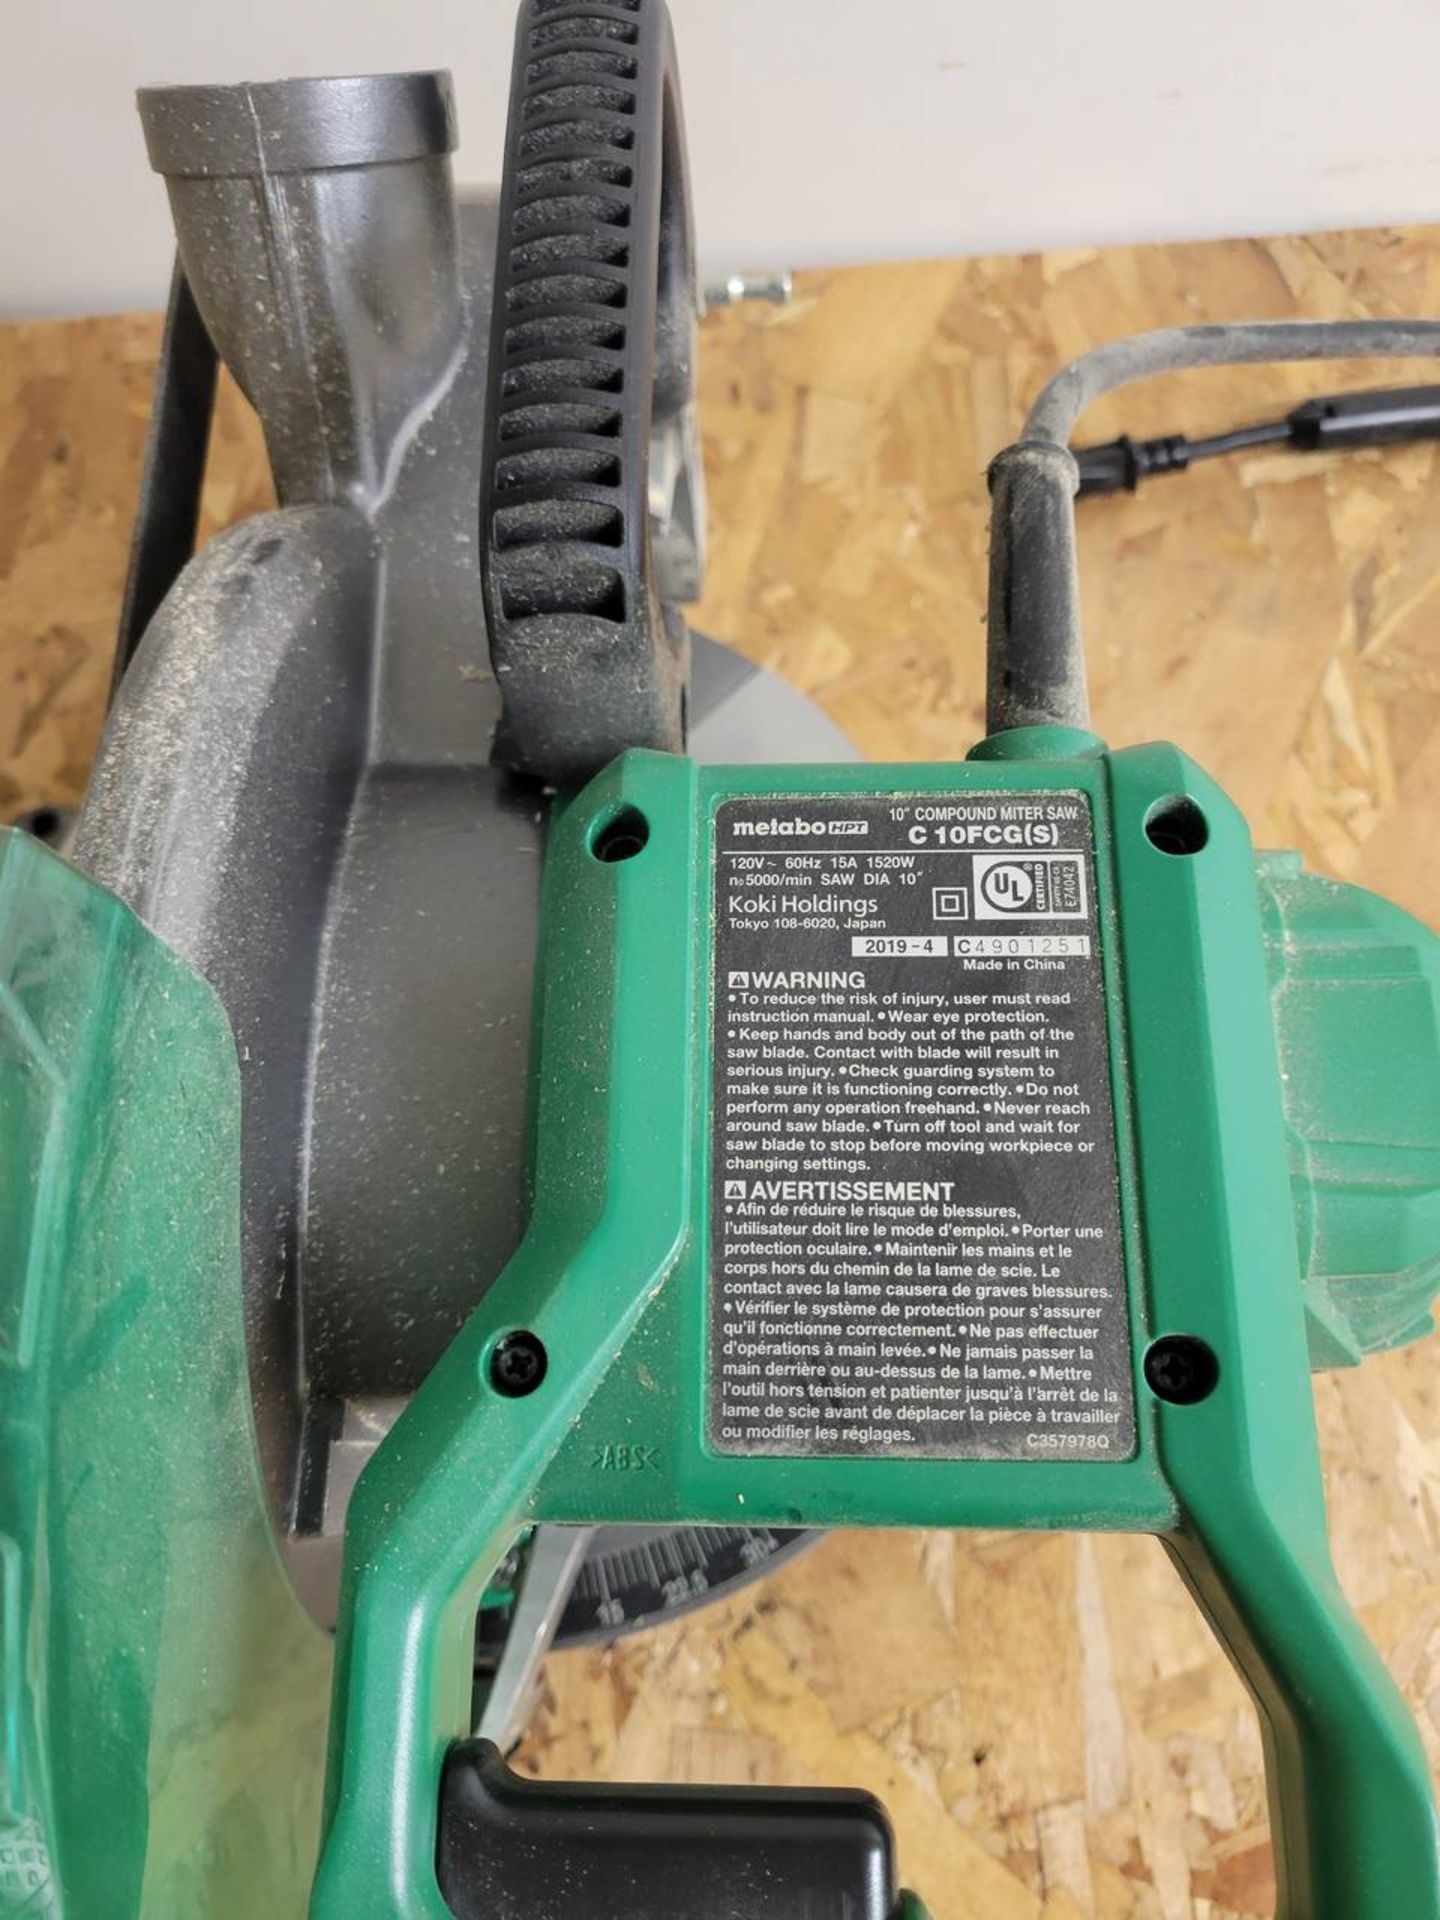 Metabo C10FCG 10" mitre saw - Image 3 of 4